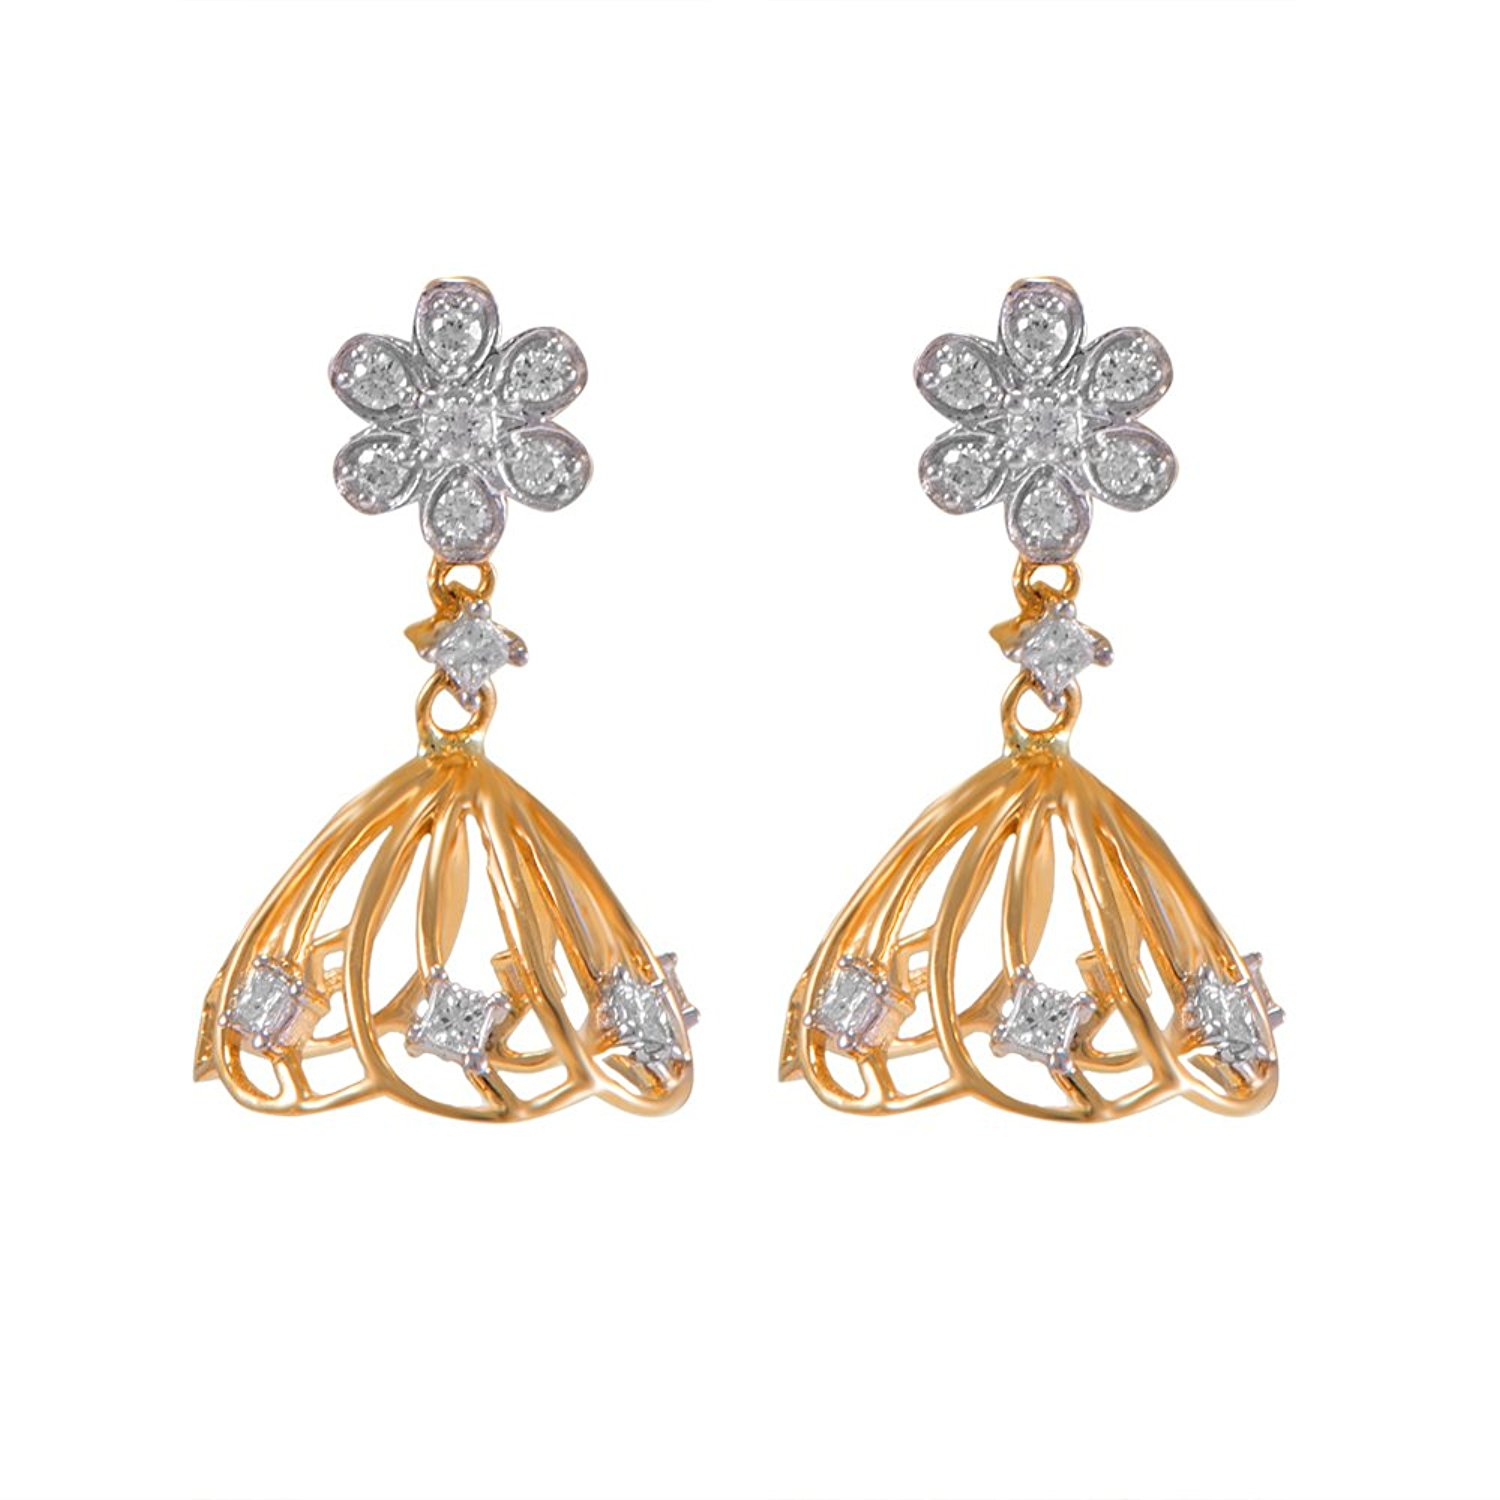 Joyalukkas Earrings Designs With Price South India Jewels,Modern Asian House Interior Design